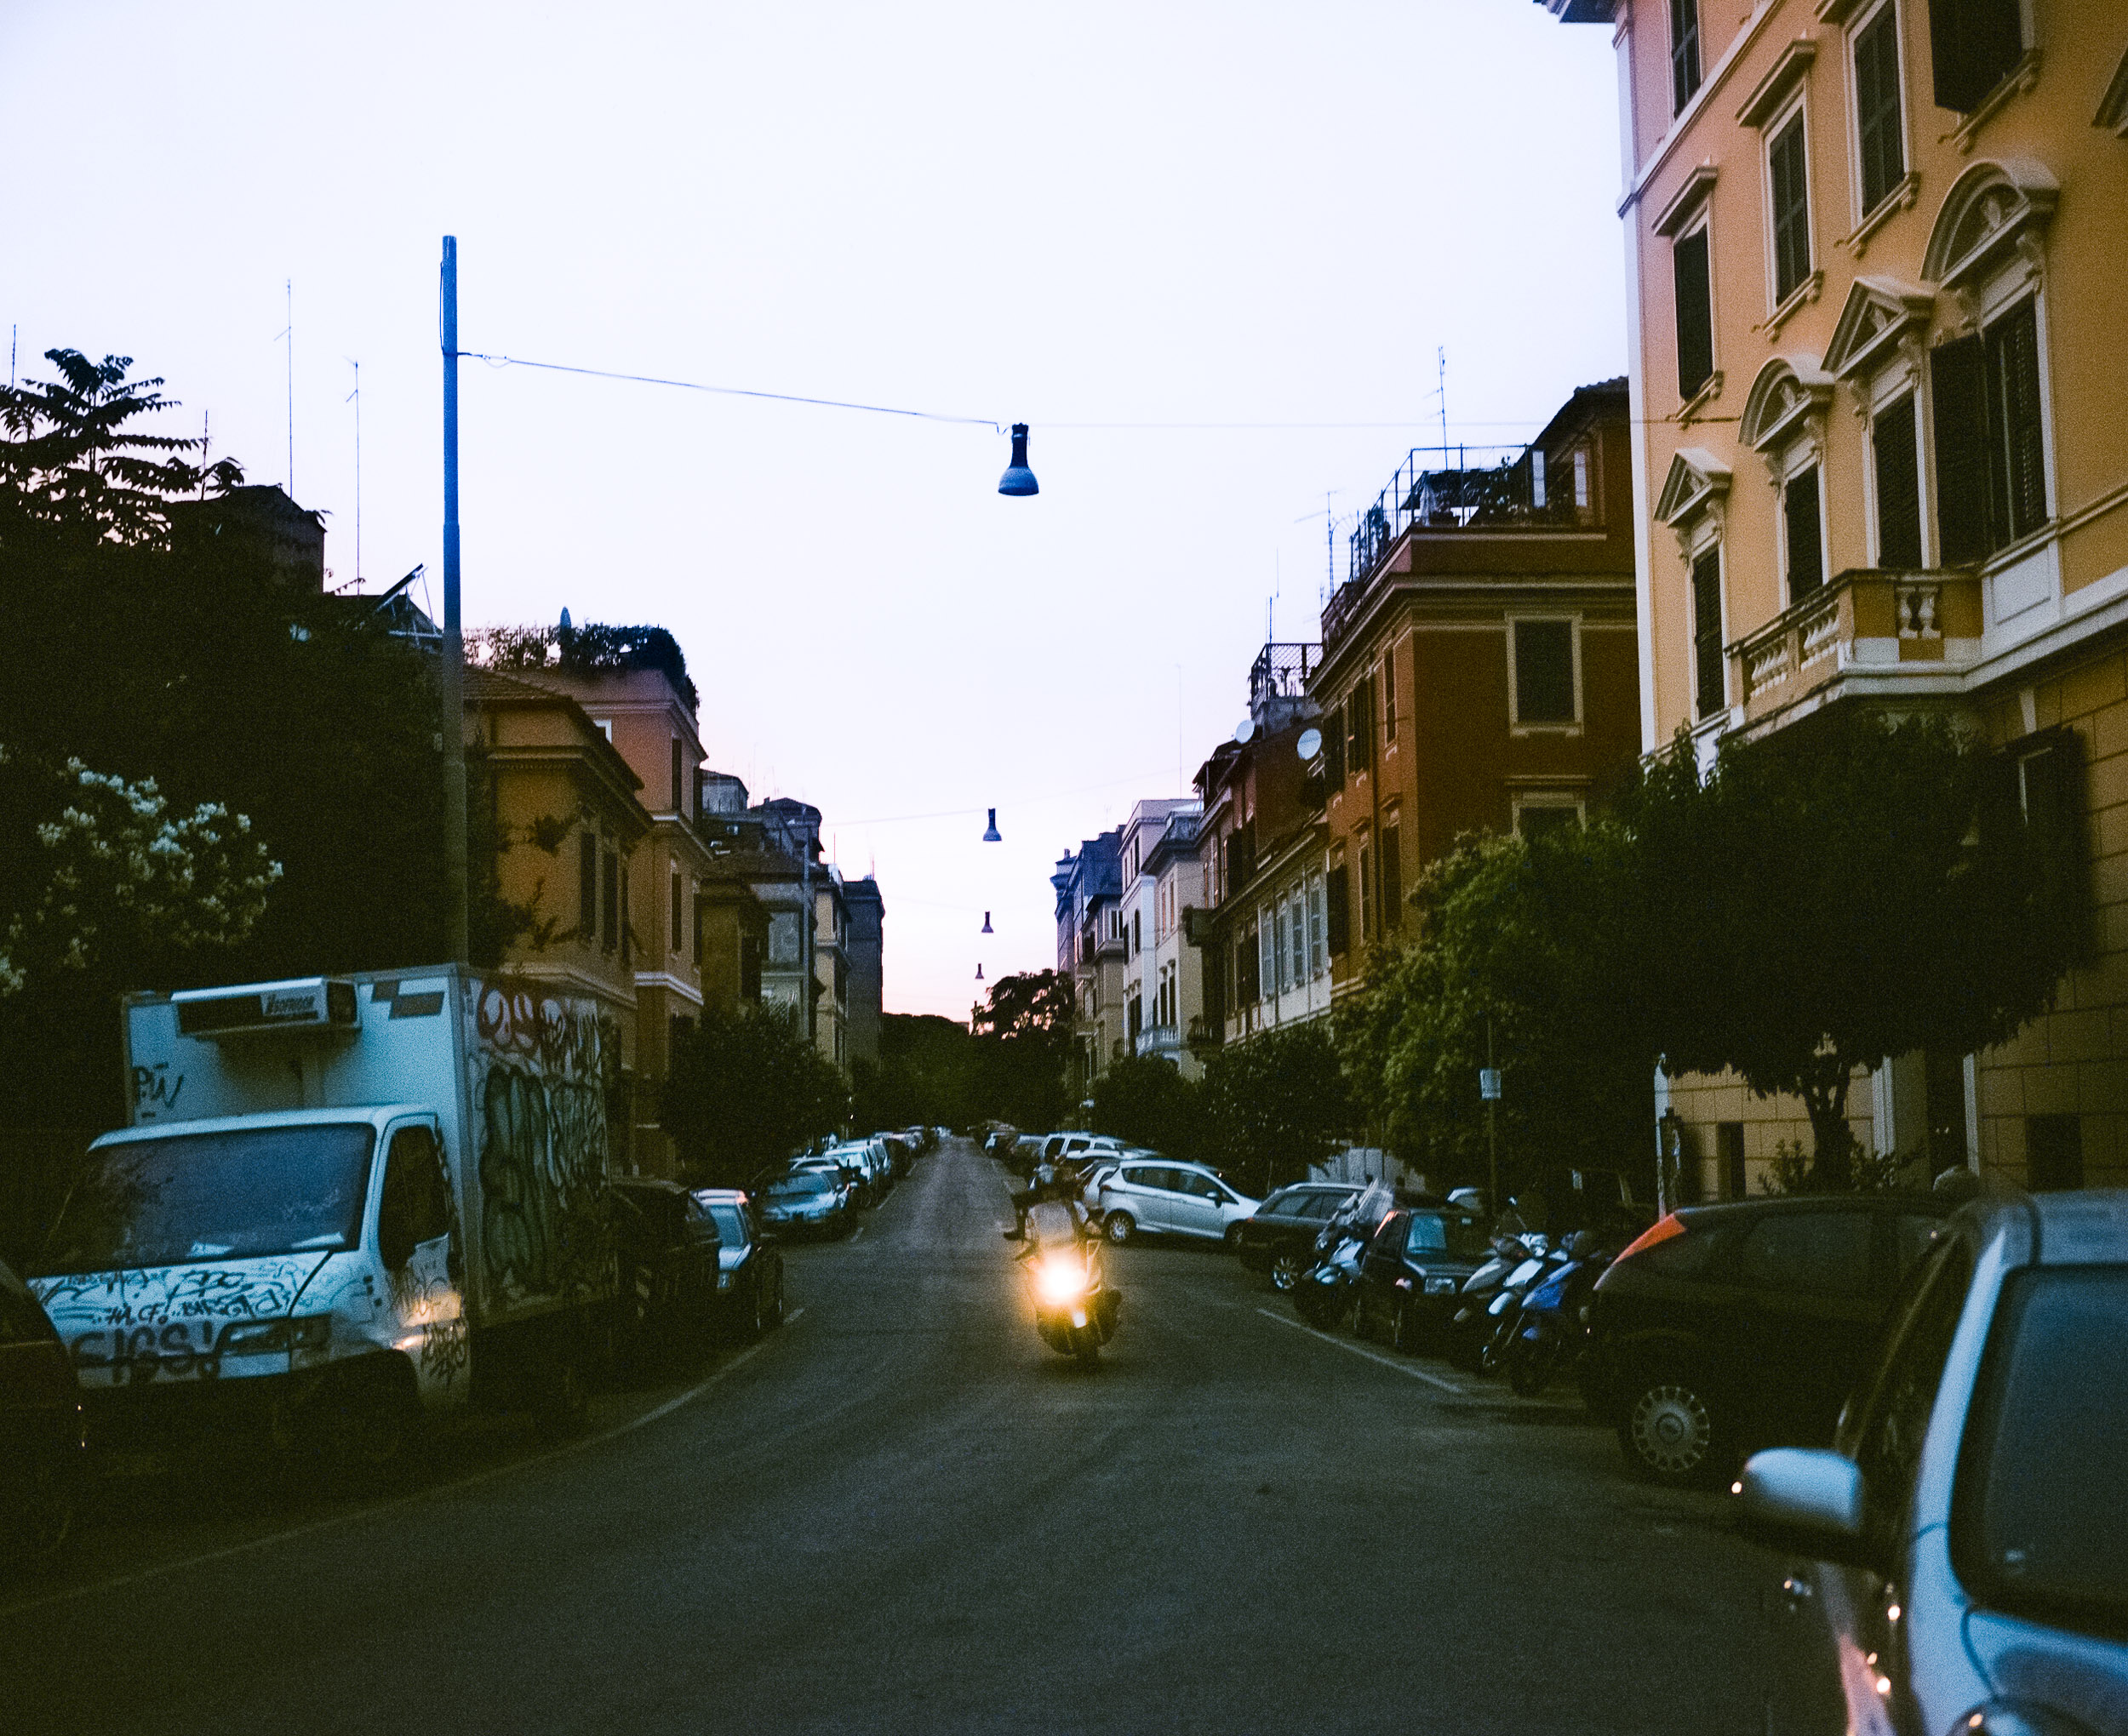 Motorcycle driving down the street in Rome with its headlight on